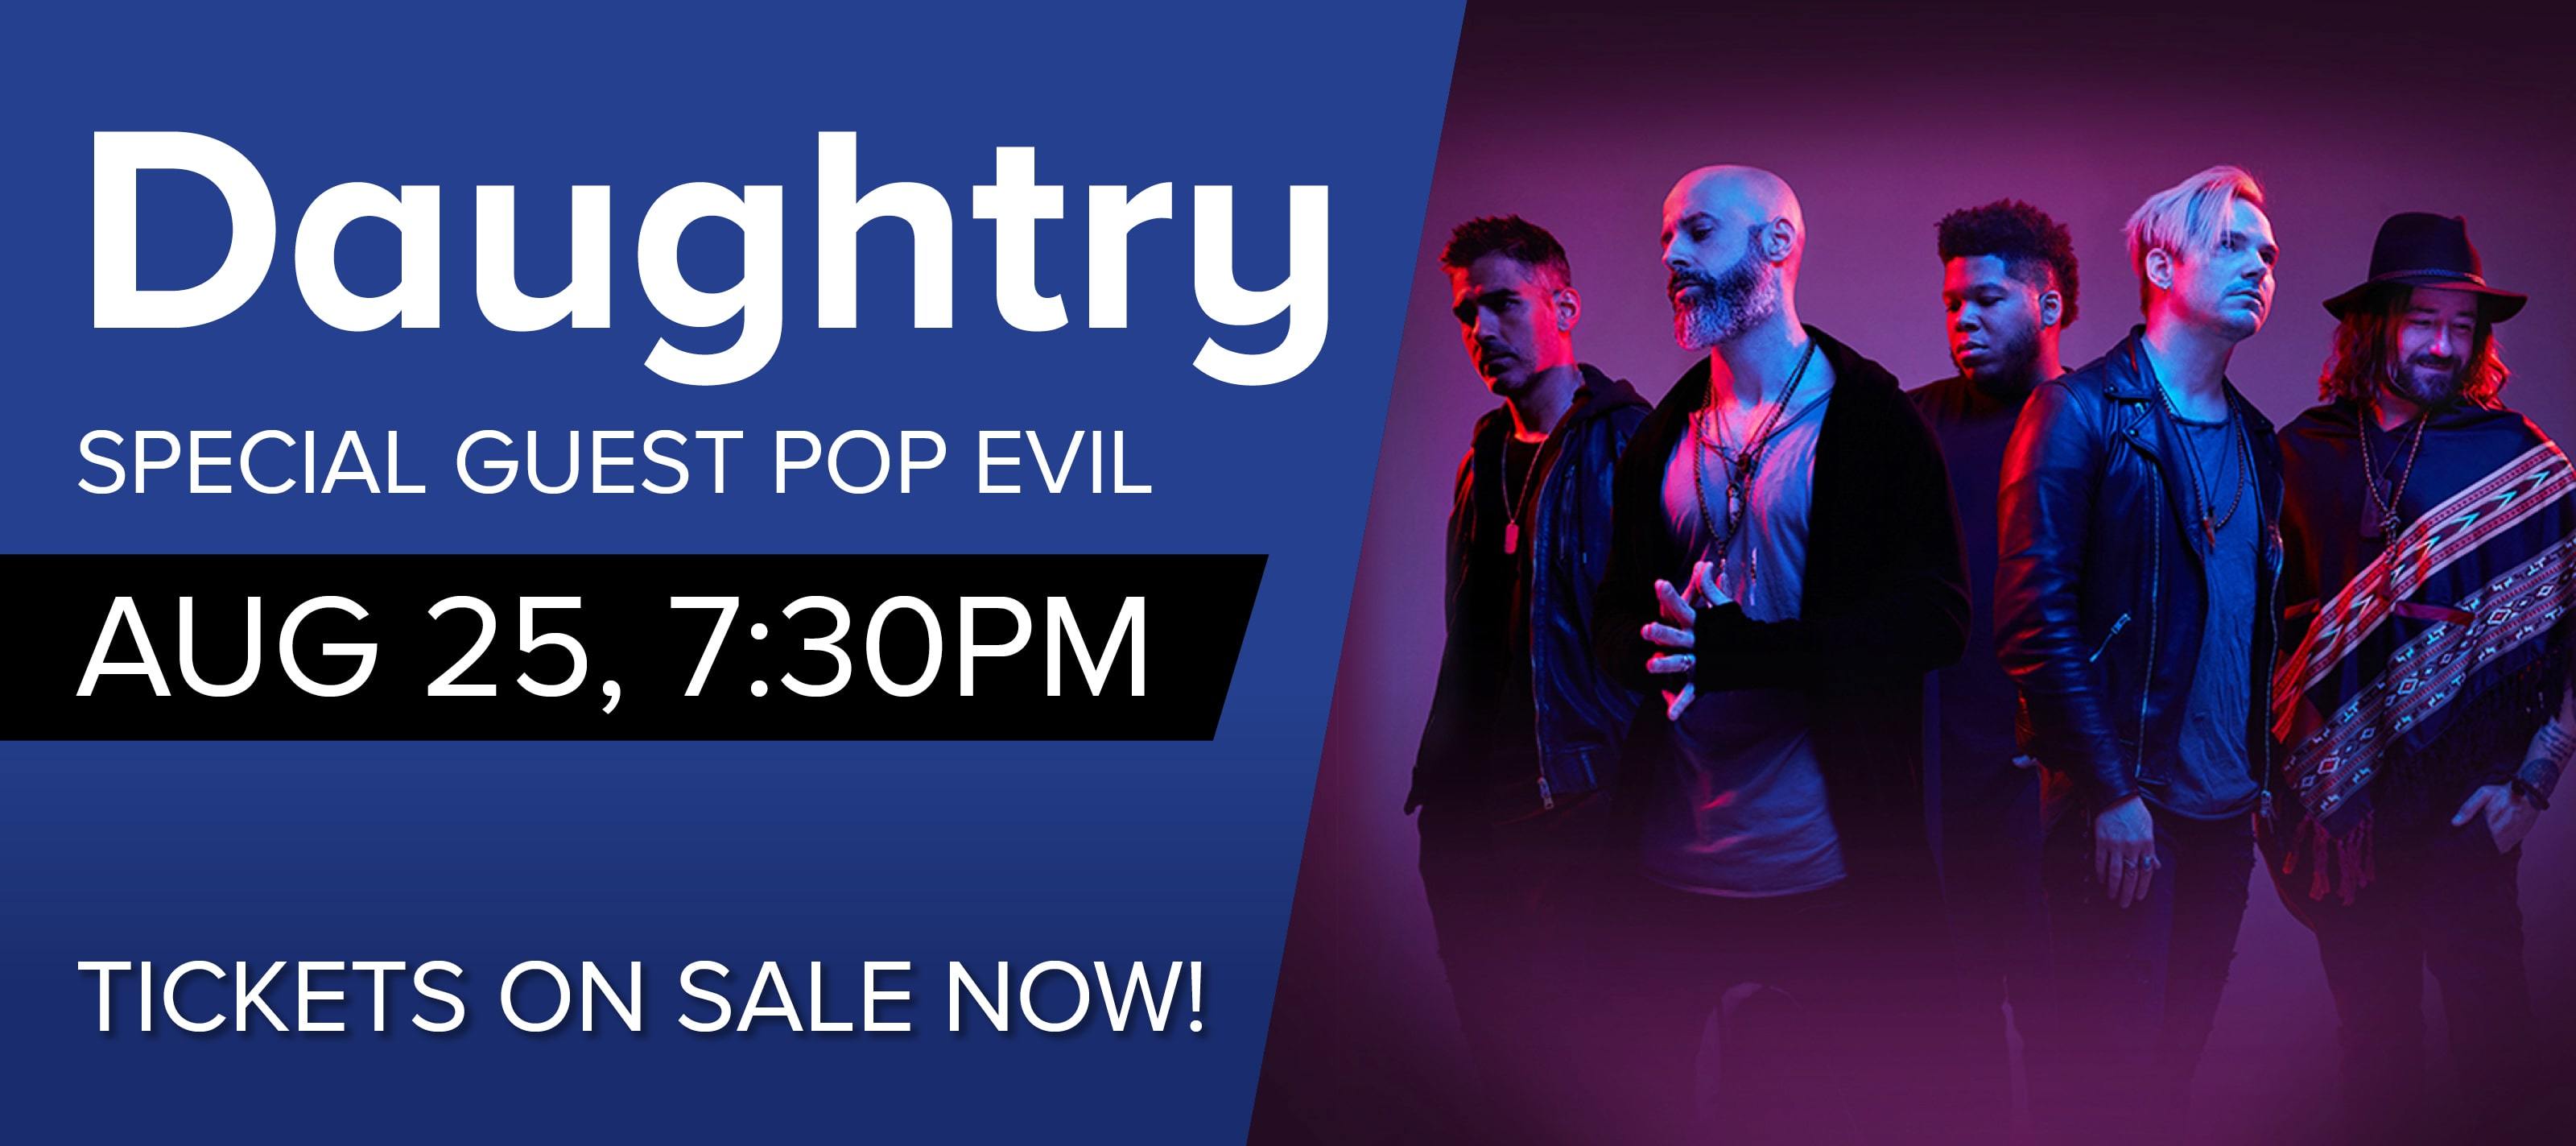 Daughtry with special guest pop evil Aug 25 at 7:30pm Tickets on sale now